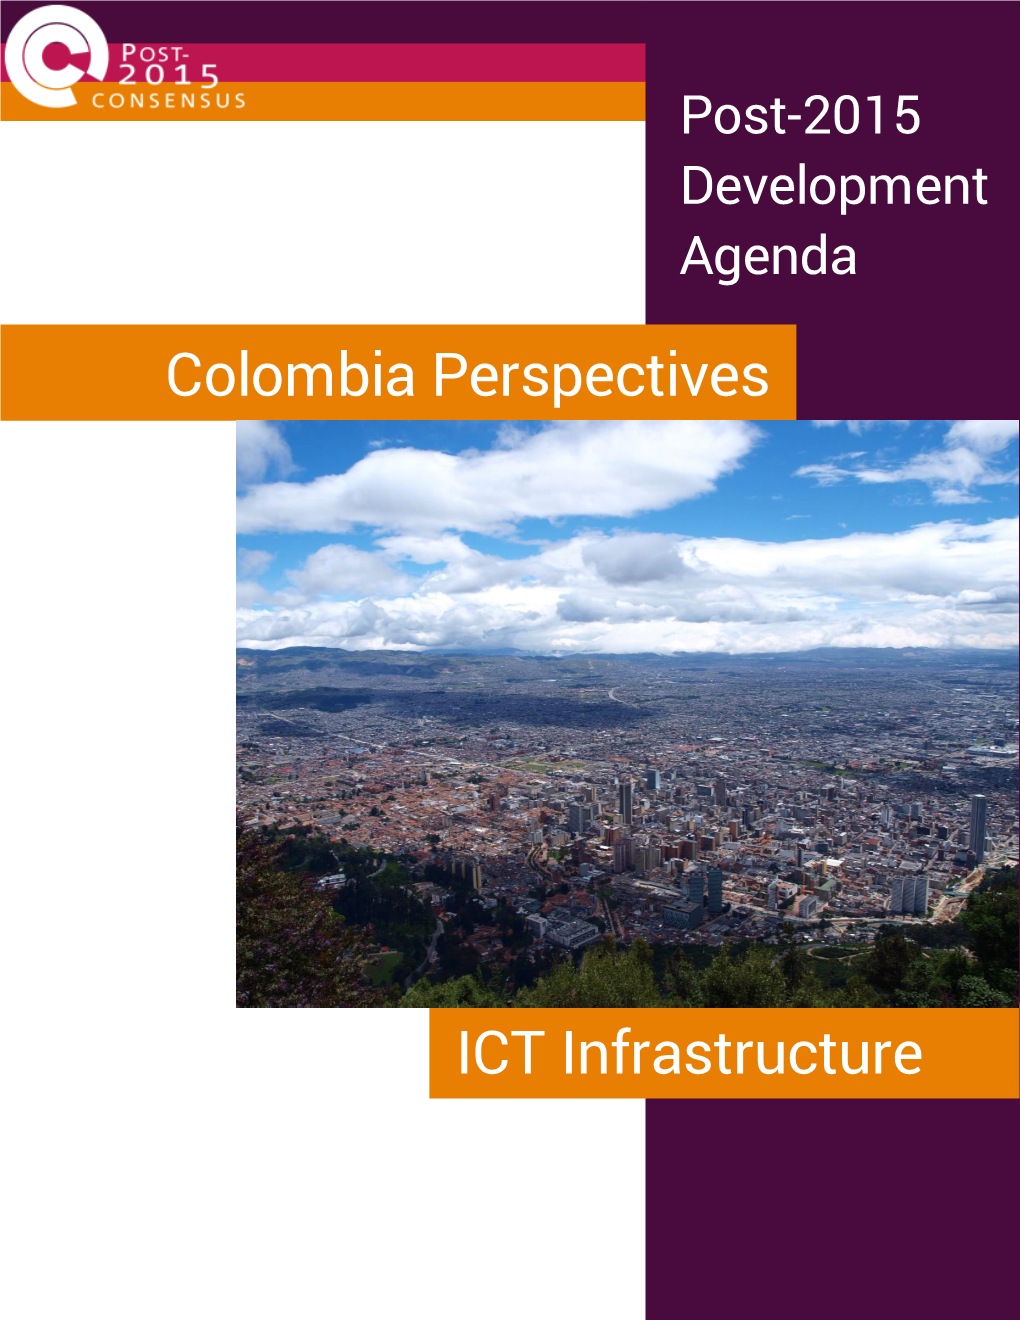 Download the Colombia Perspectives: ICT Infrastructure